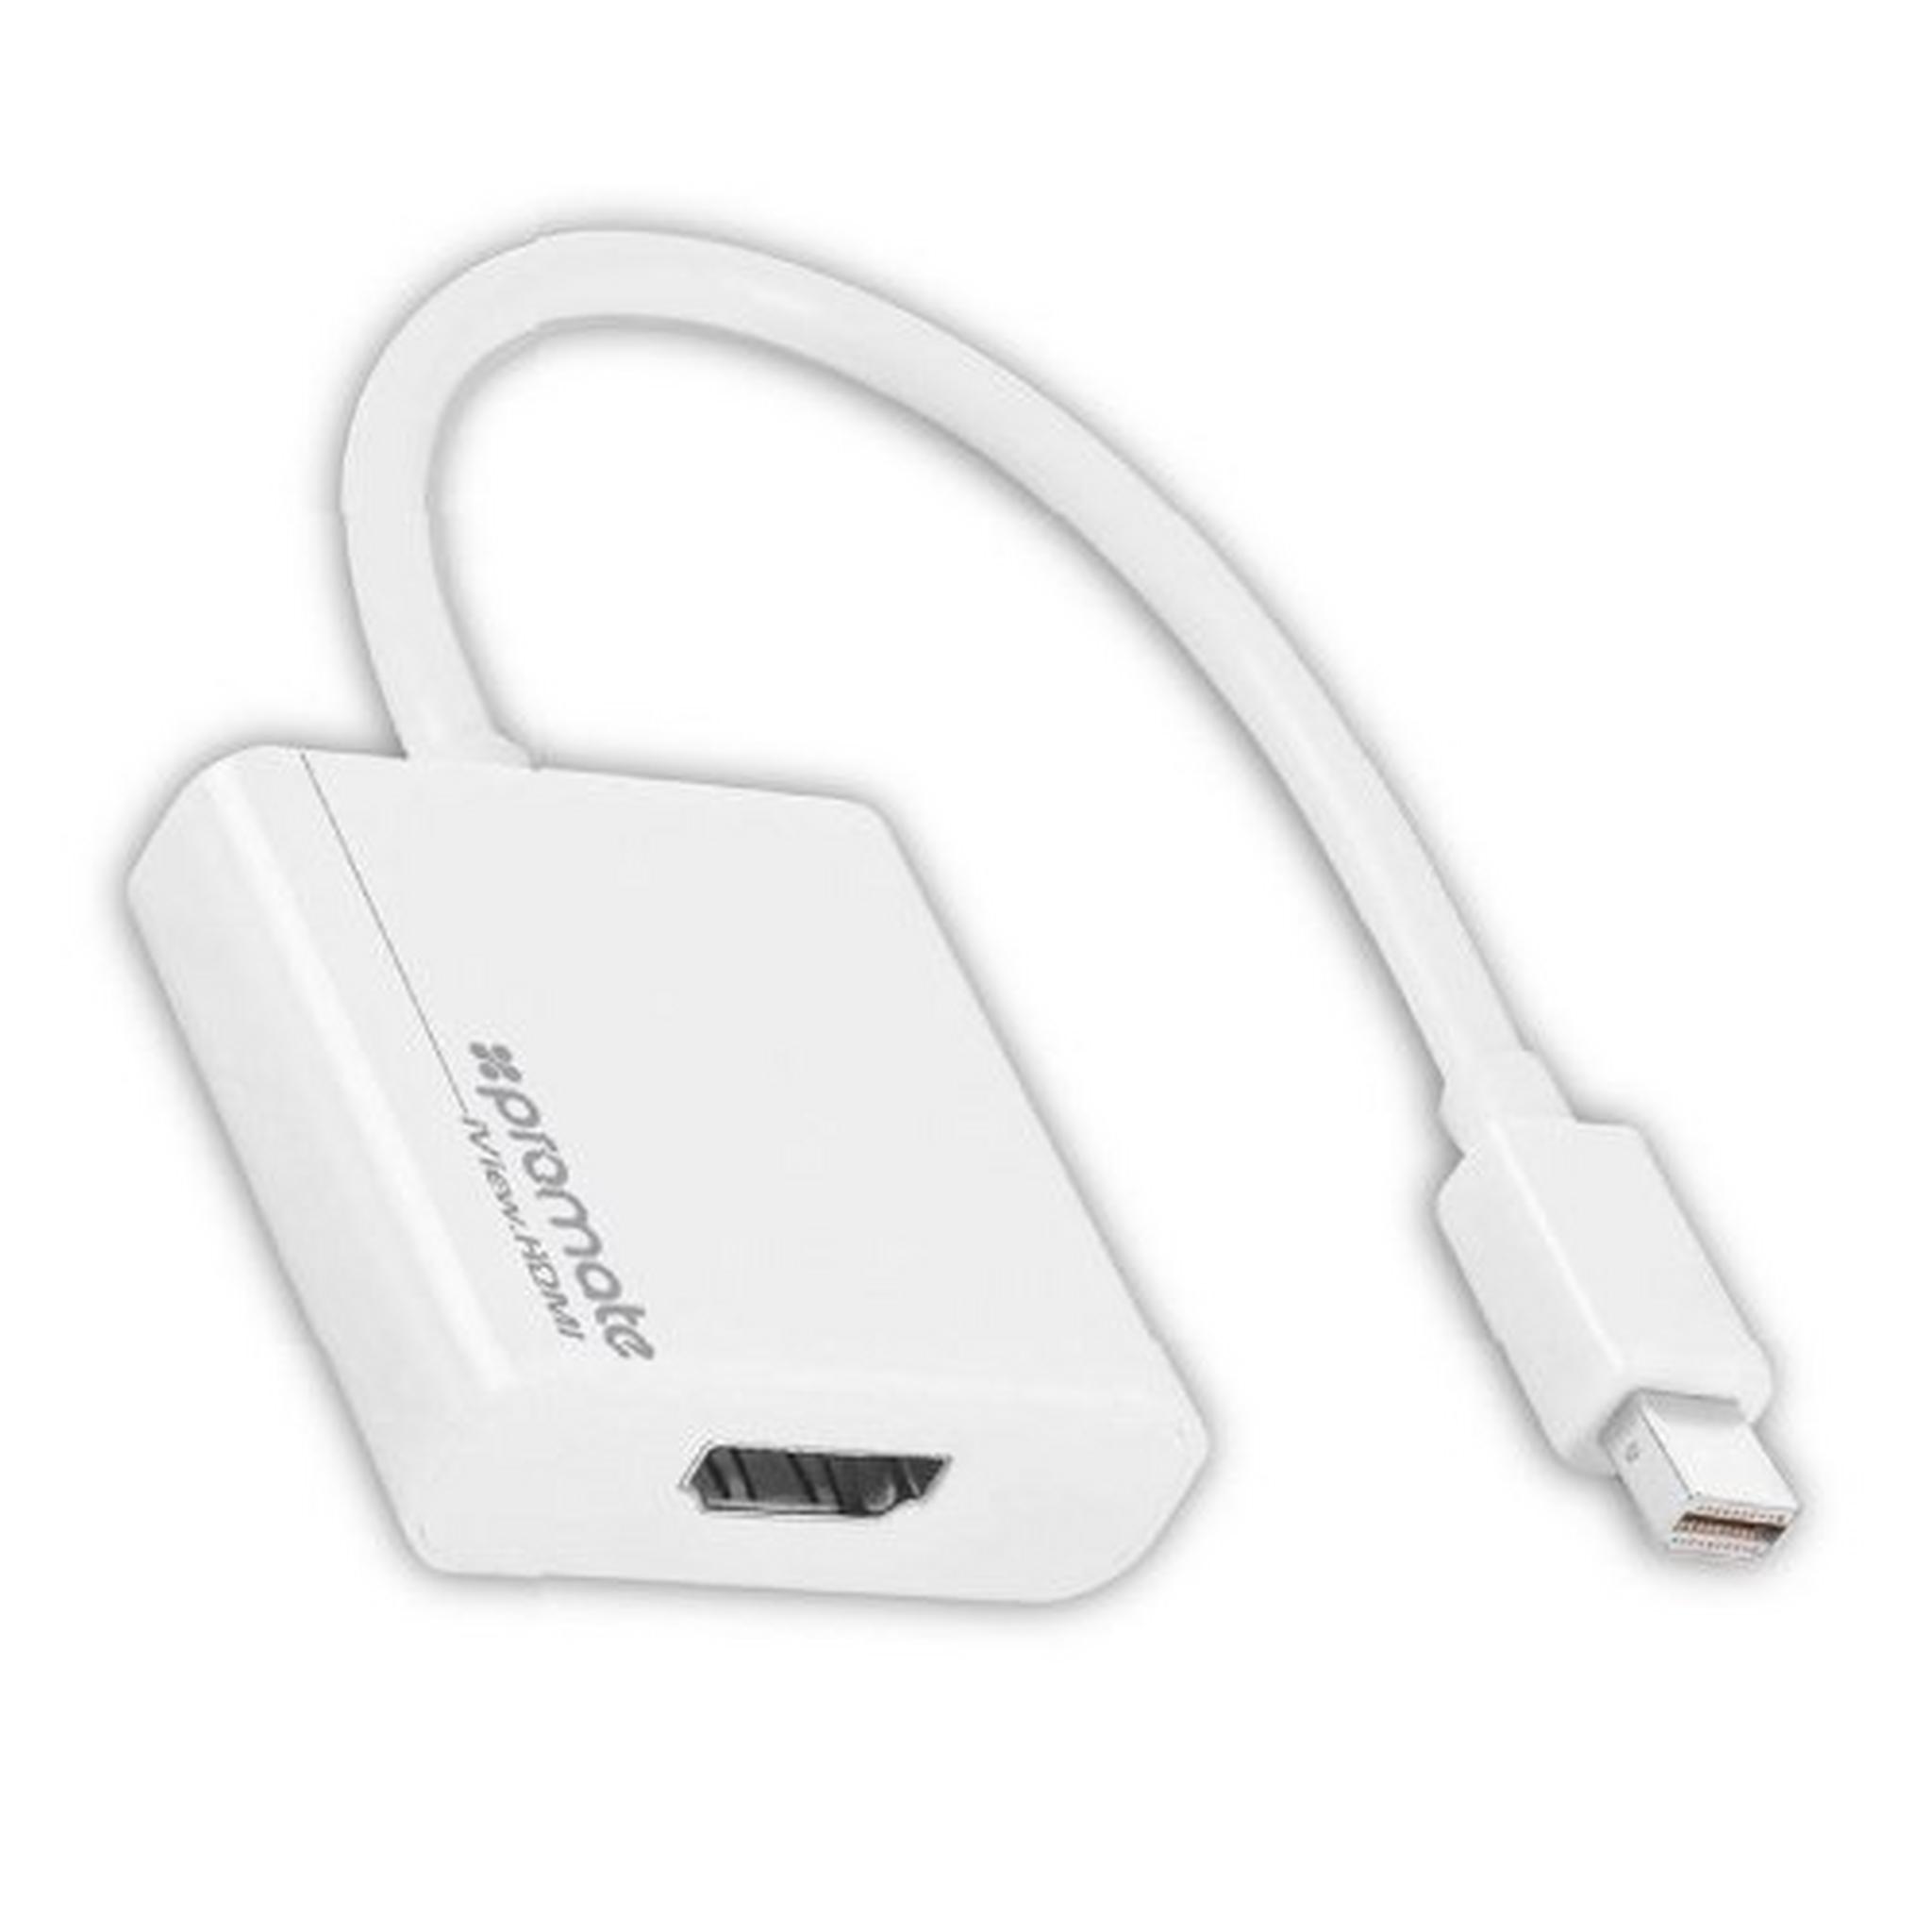 Promate iView HDMI USB Converter